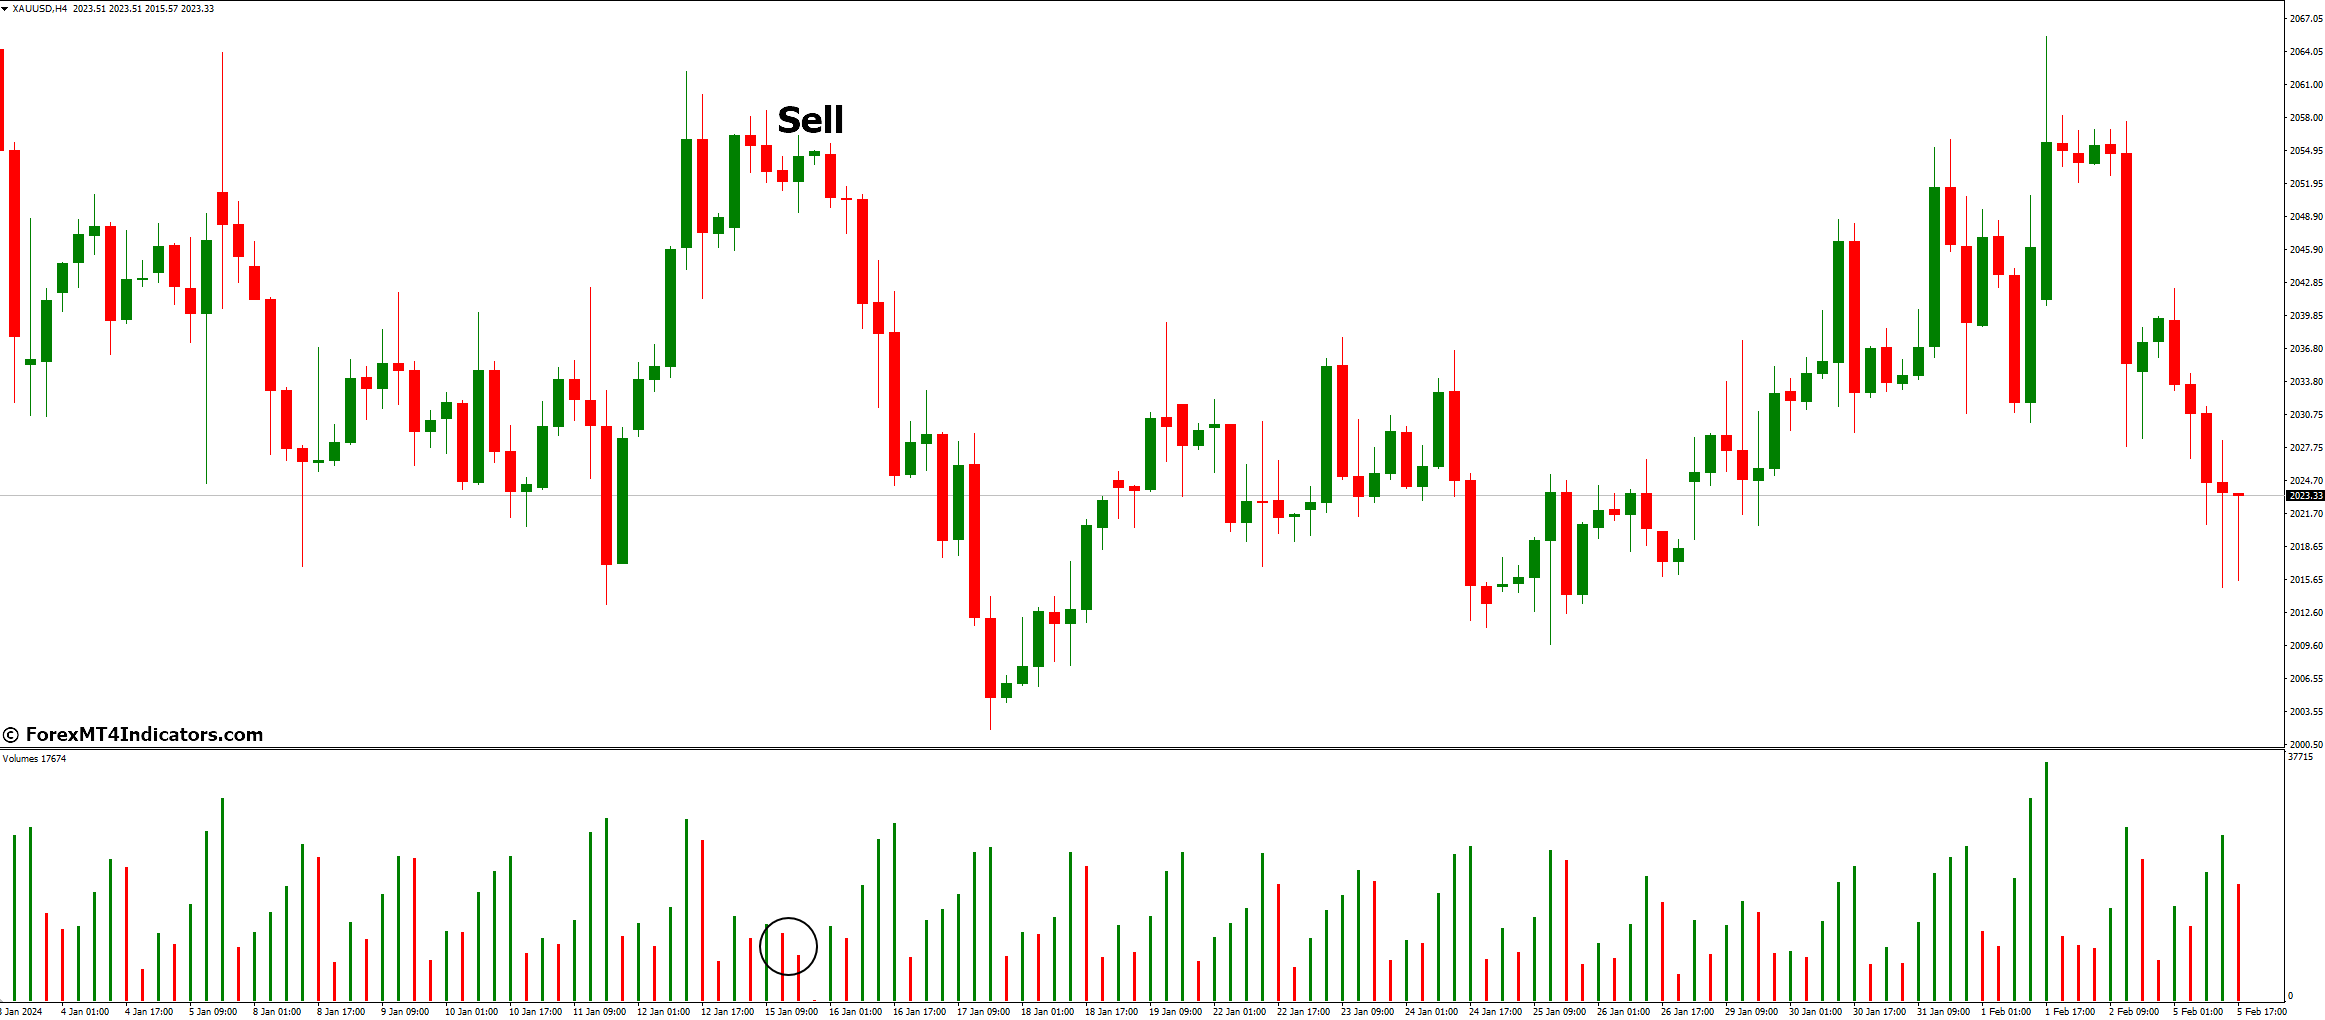 How To Trade With Volumes Indicator - Sell Entry